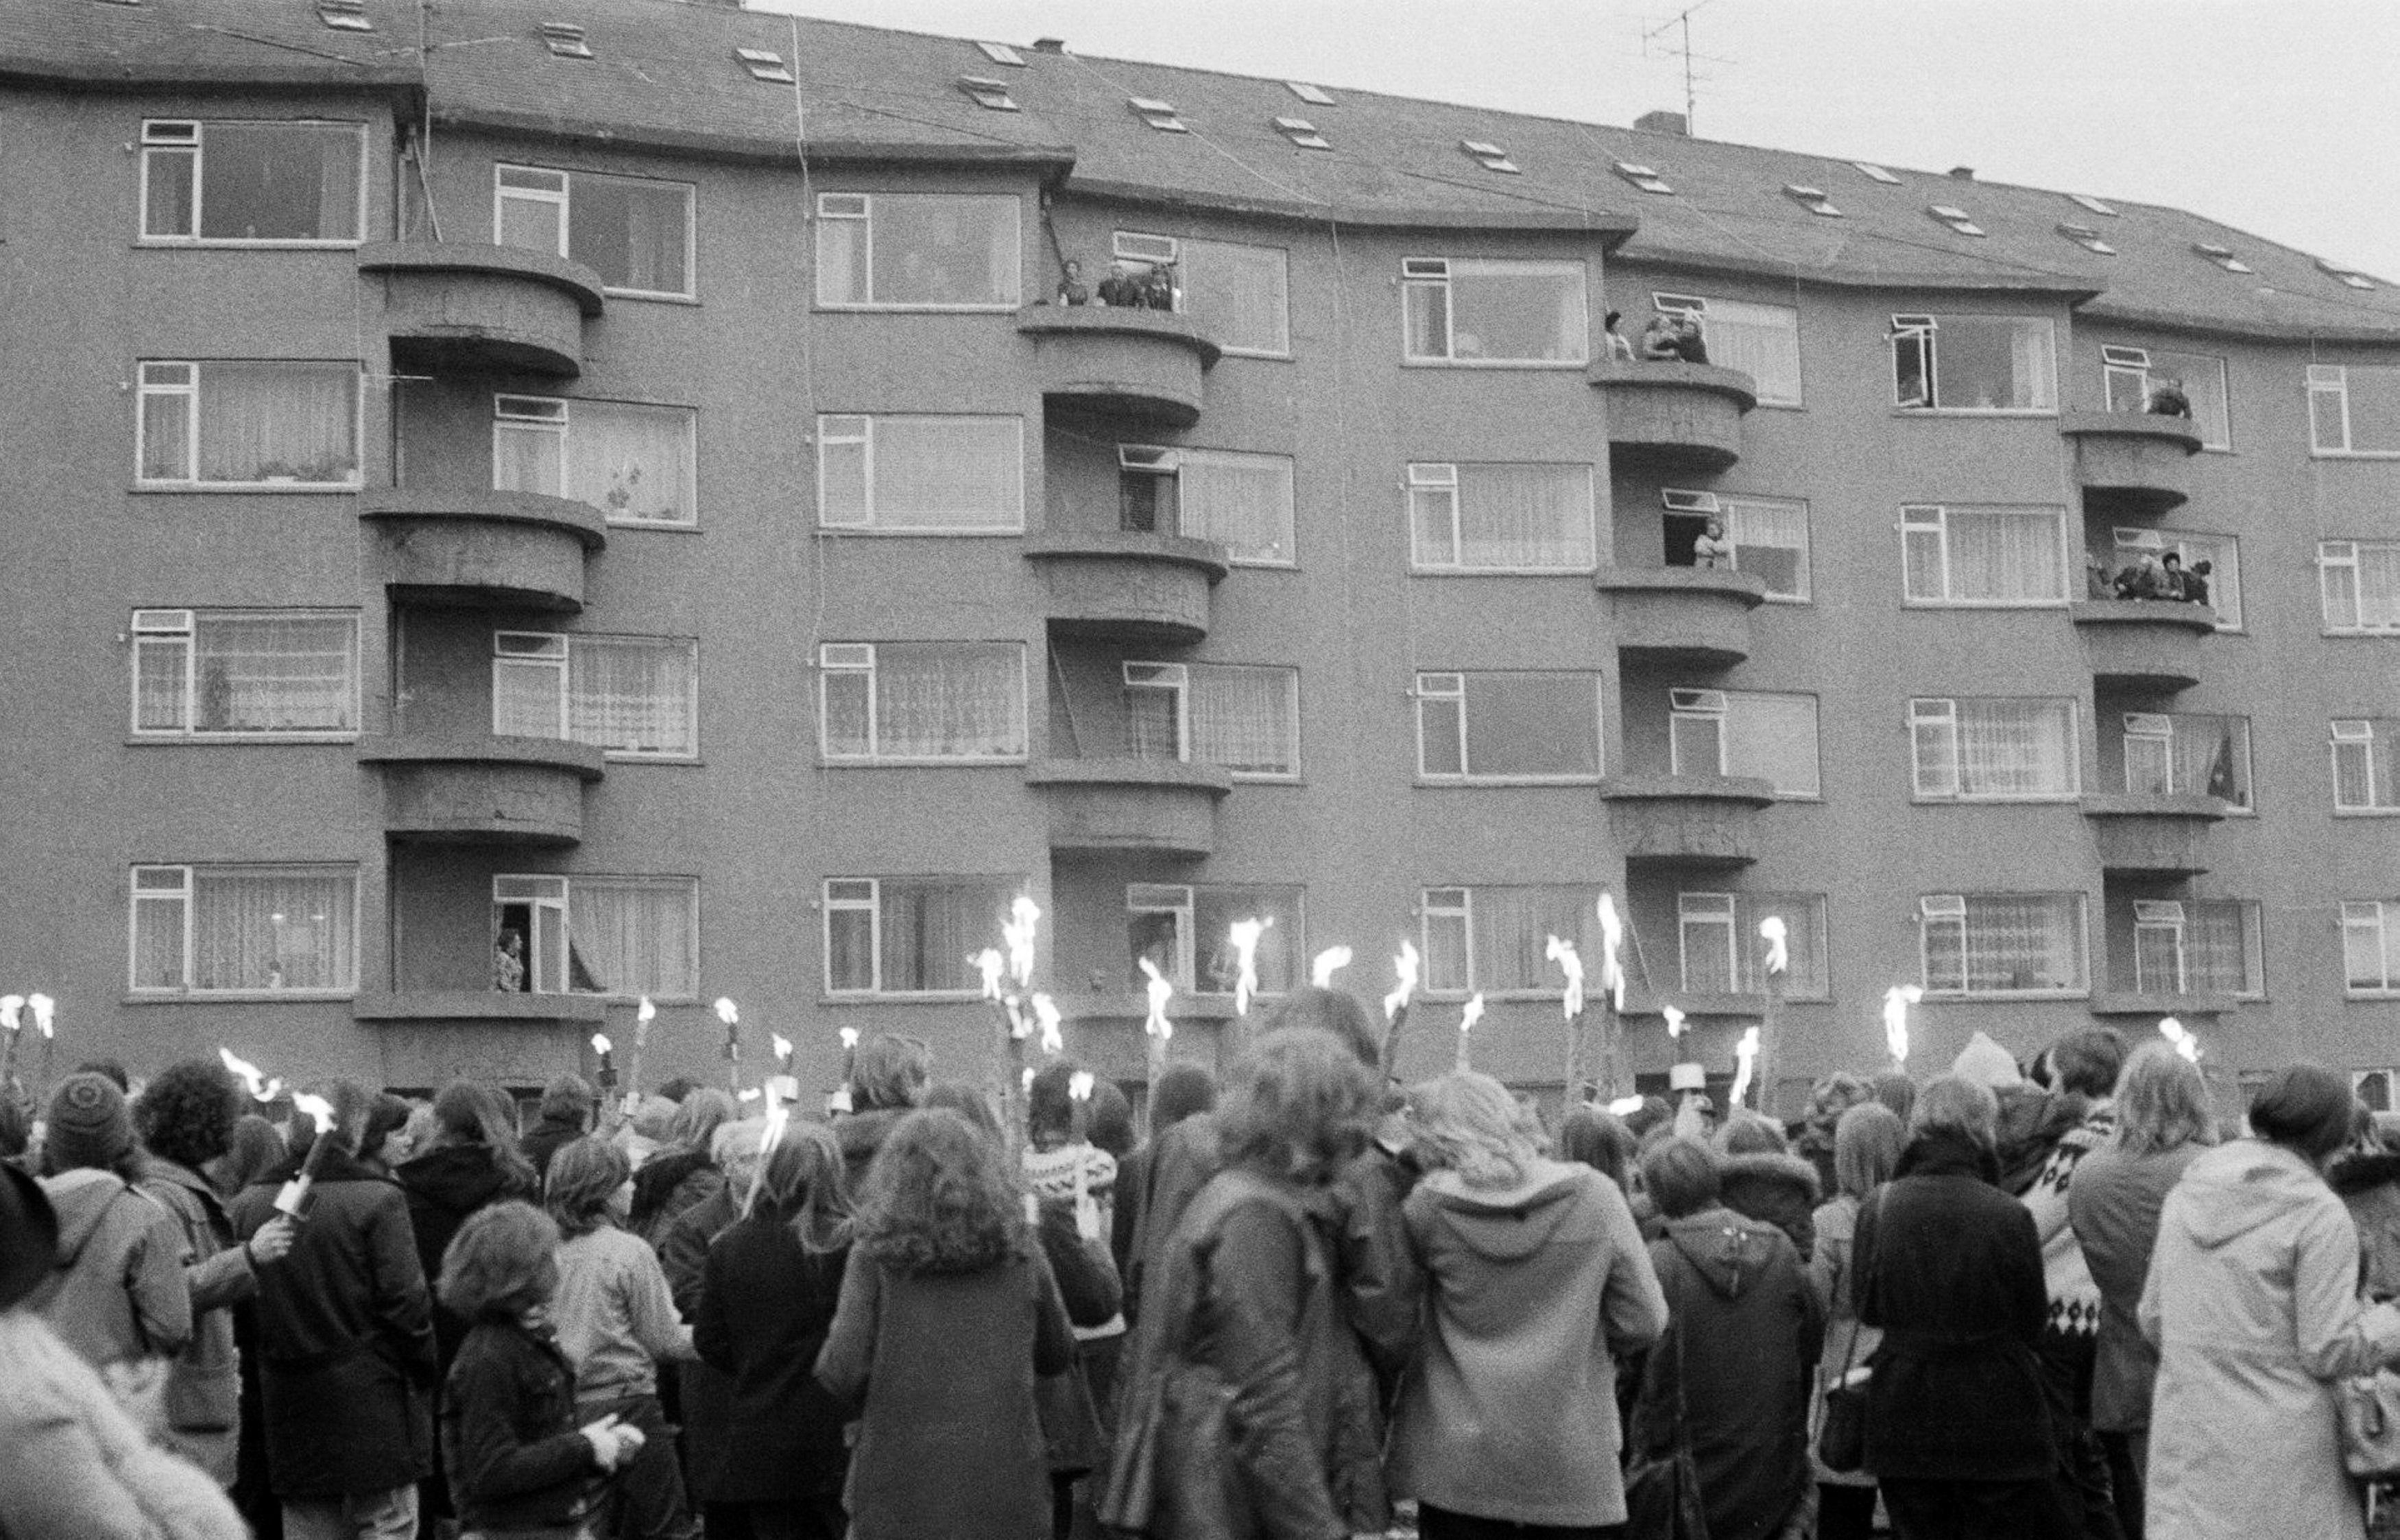 On his 85th birthday, in 1974, fans gathered outside his home in Reykjavík.